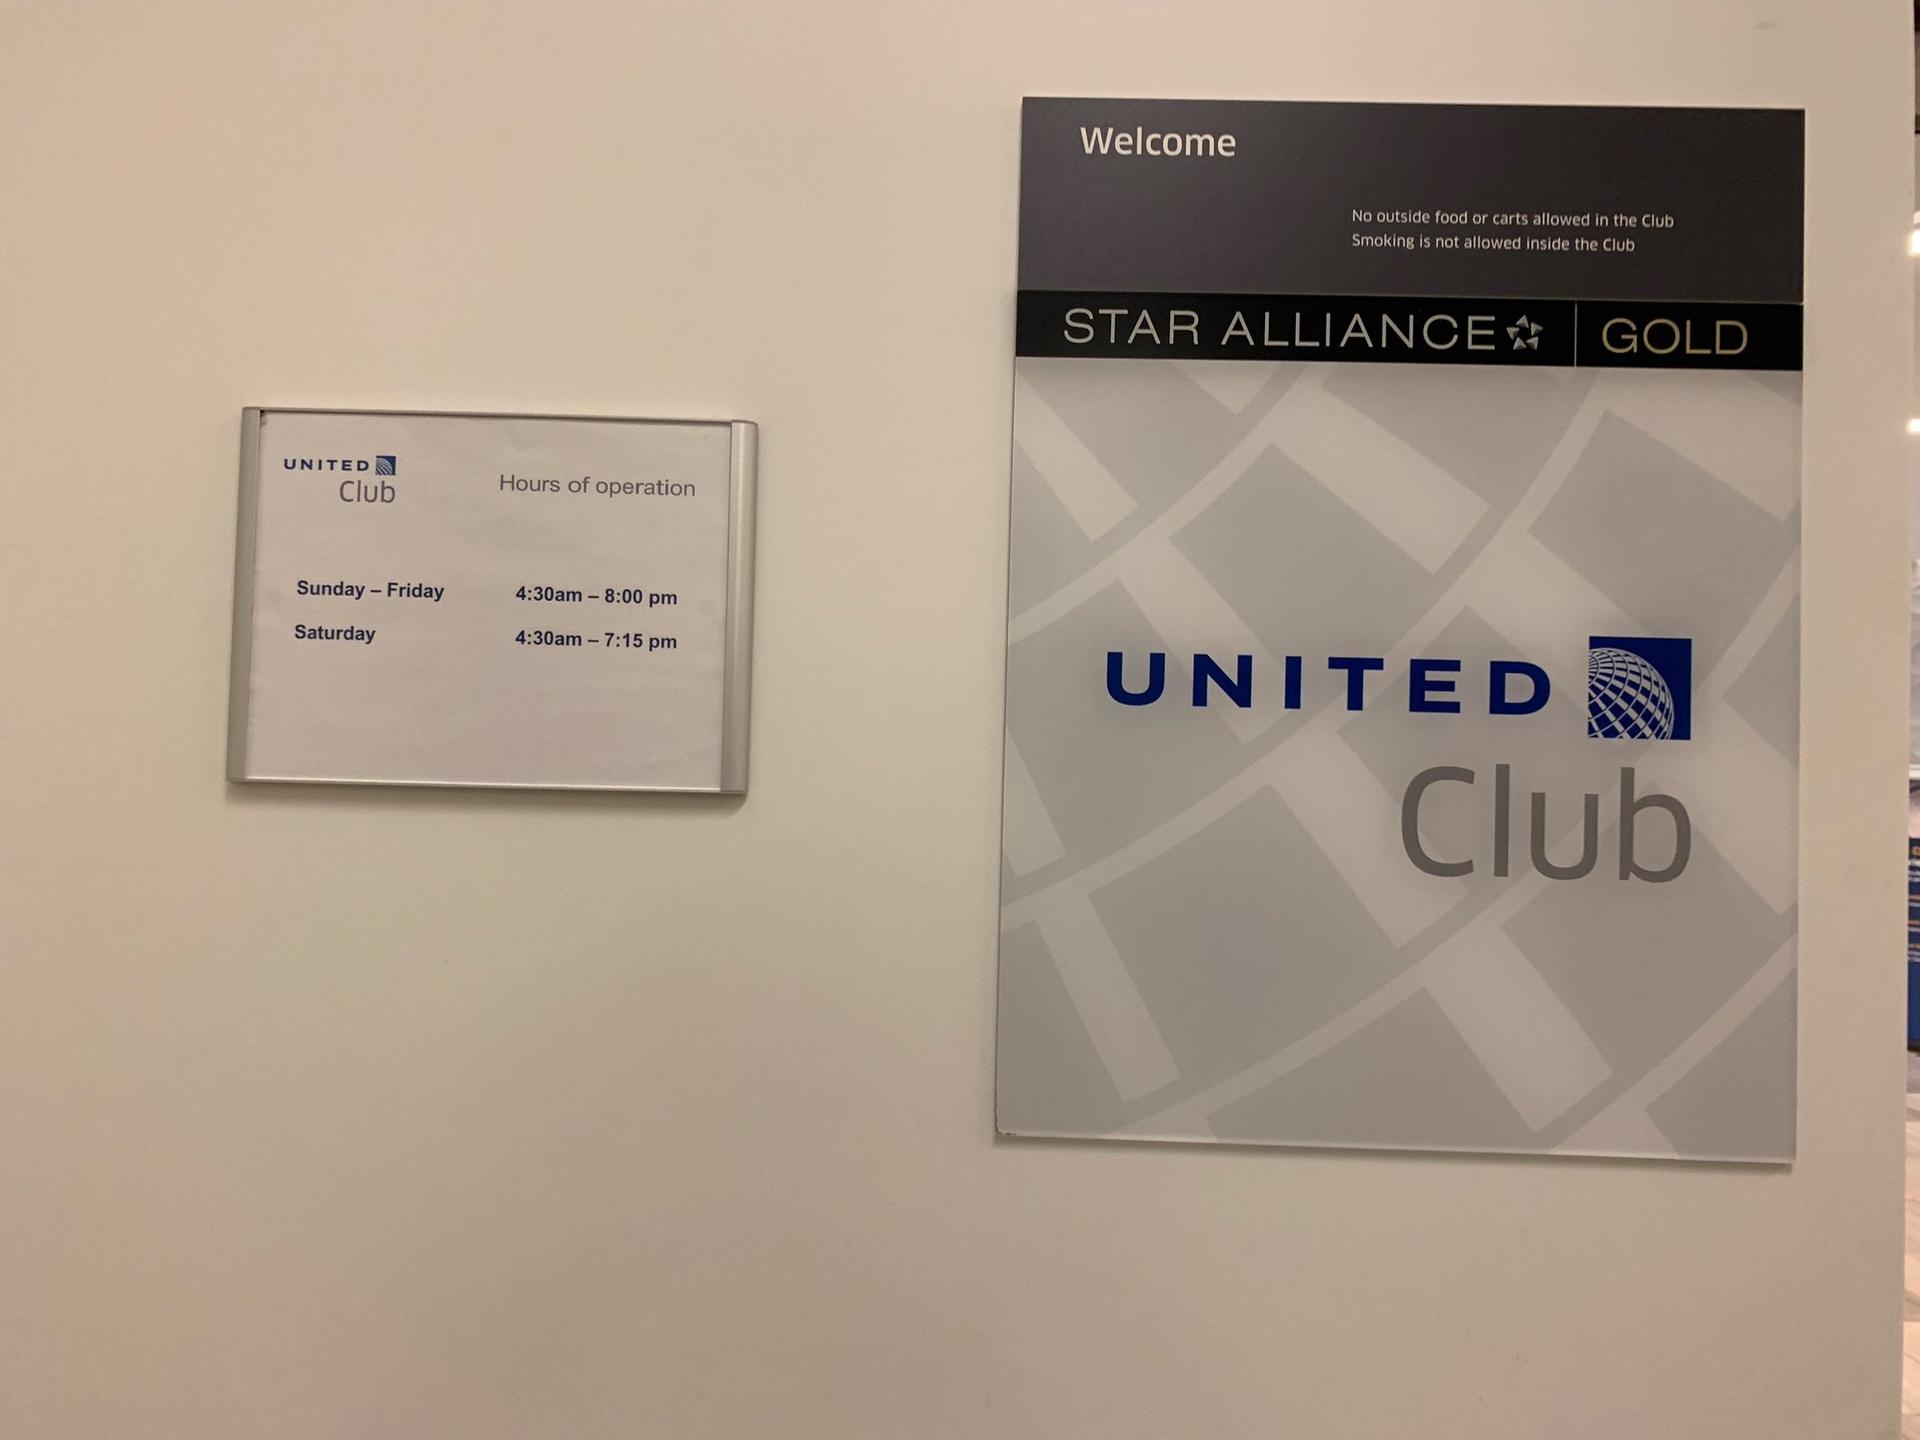 United Airlines United Club image 22 of 28